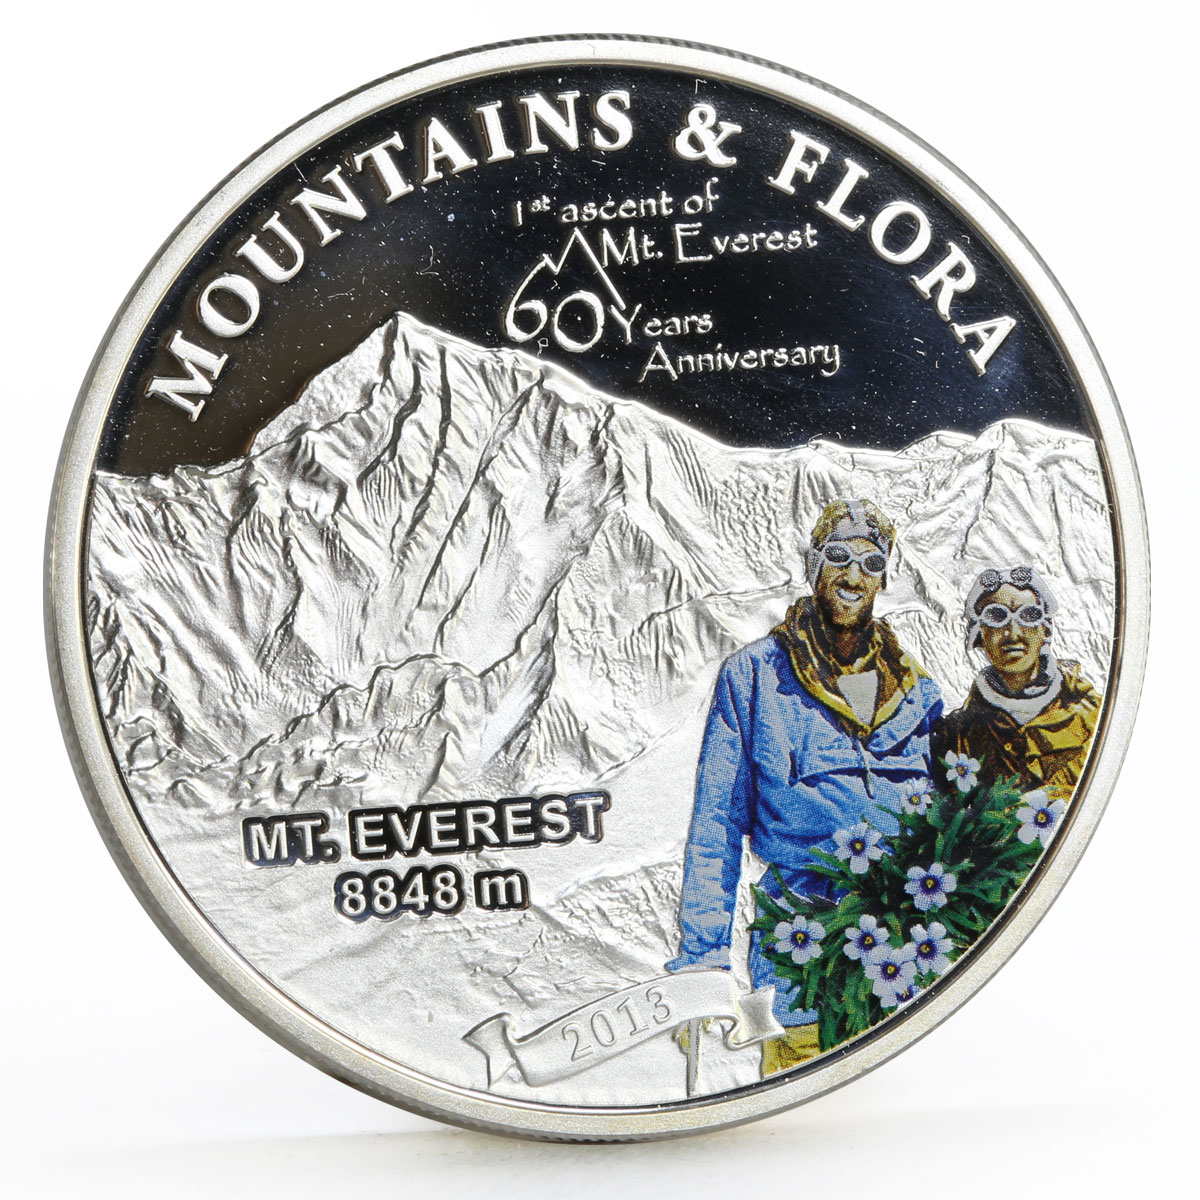 Palau 5 dollars First Ascent of Mountain Everset colored proof silver coin 2013